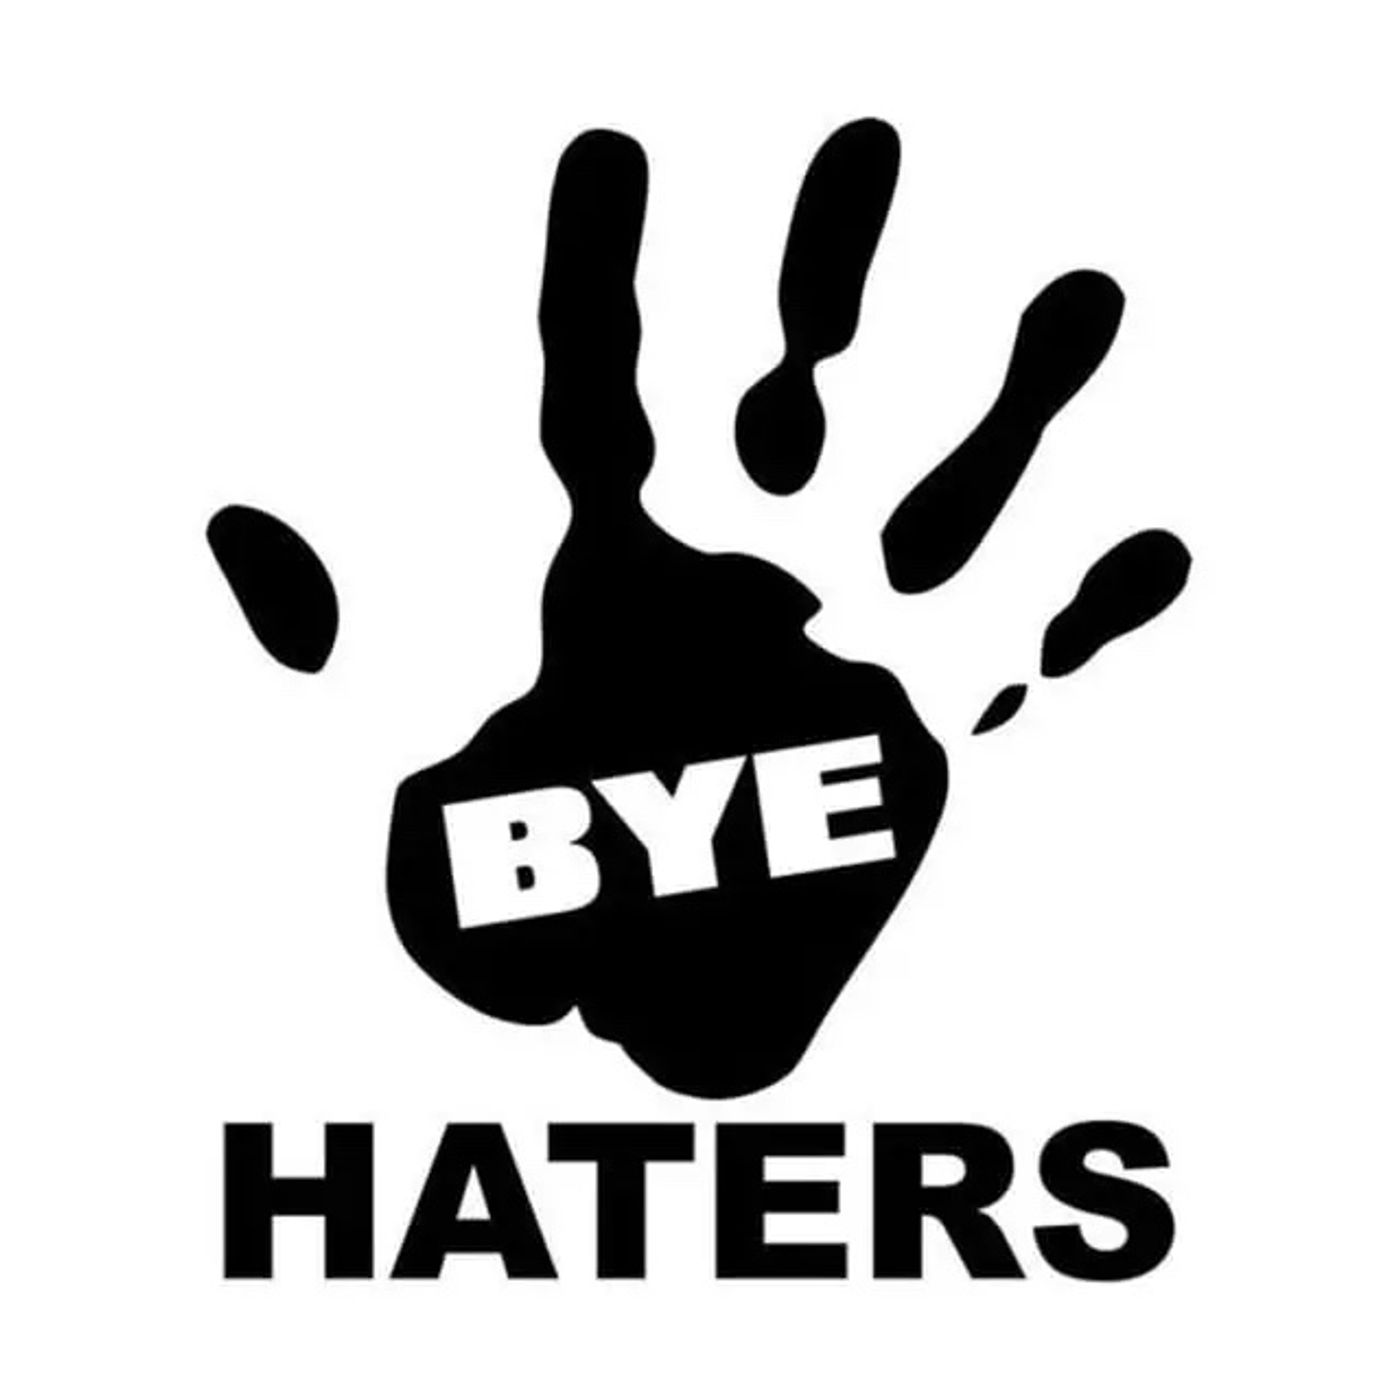 STOP THE HATERS FROM HATING